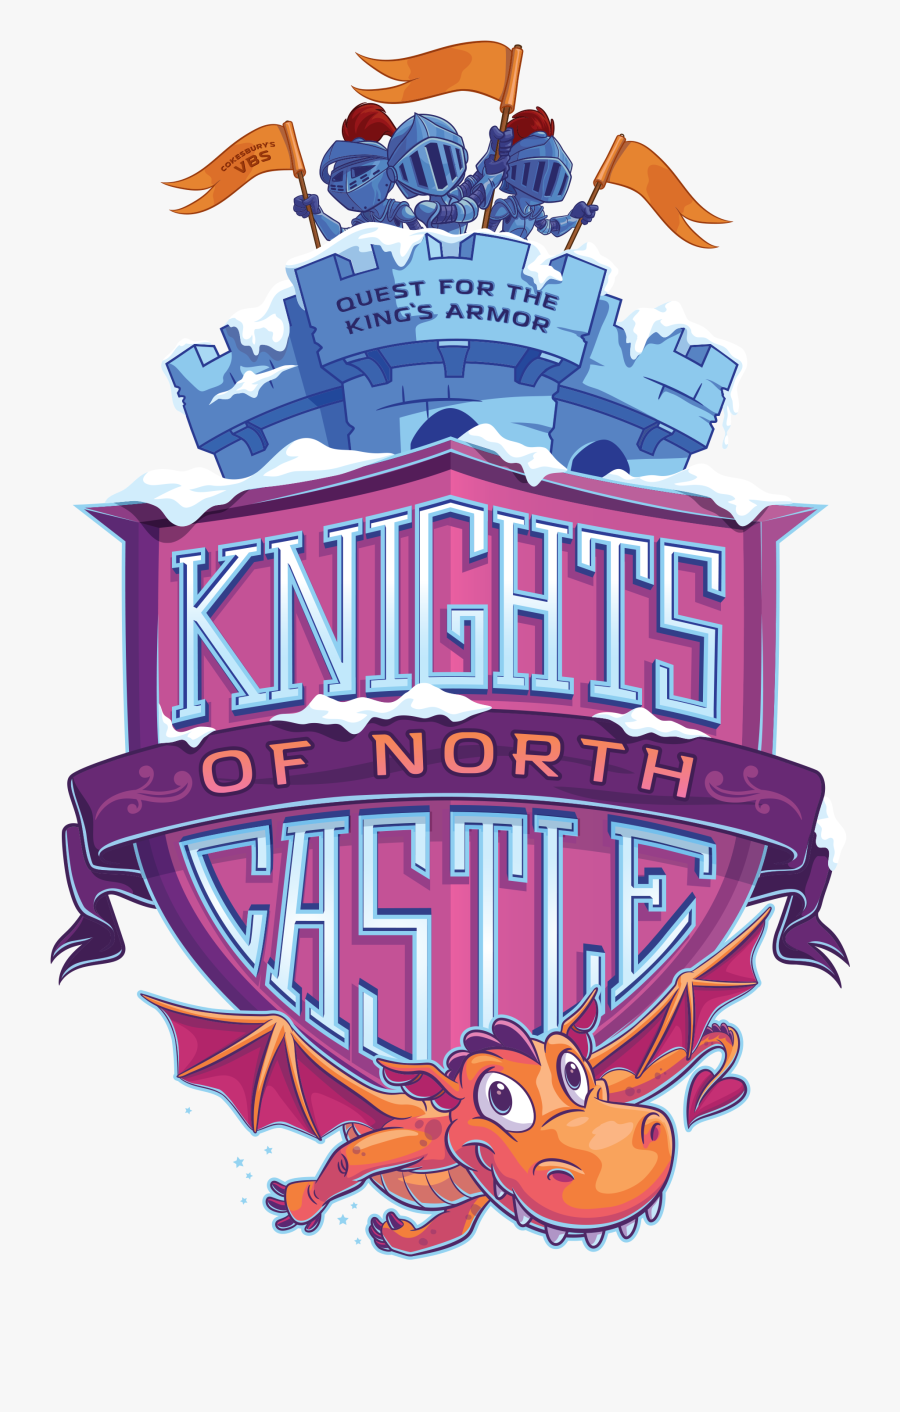 Cokesbury Vbs 2020 Knights Of The North Castle - Cokesbury Vbs 2020, Transparent Clipart